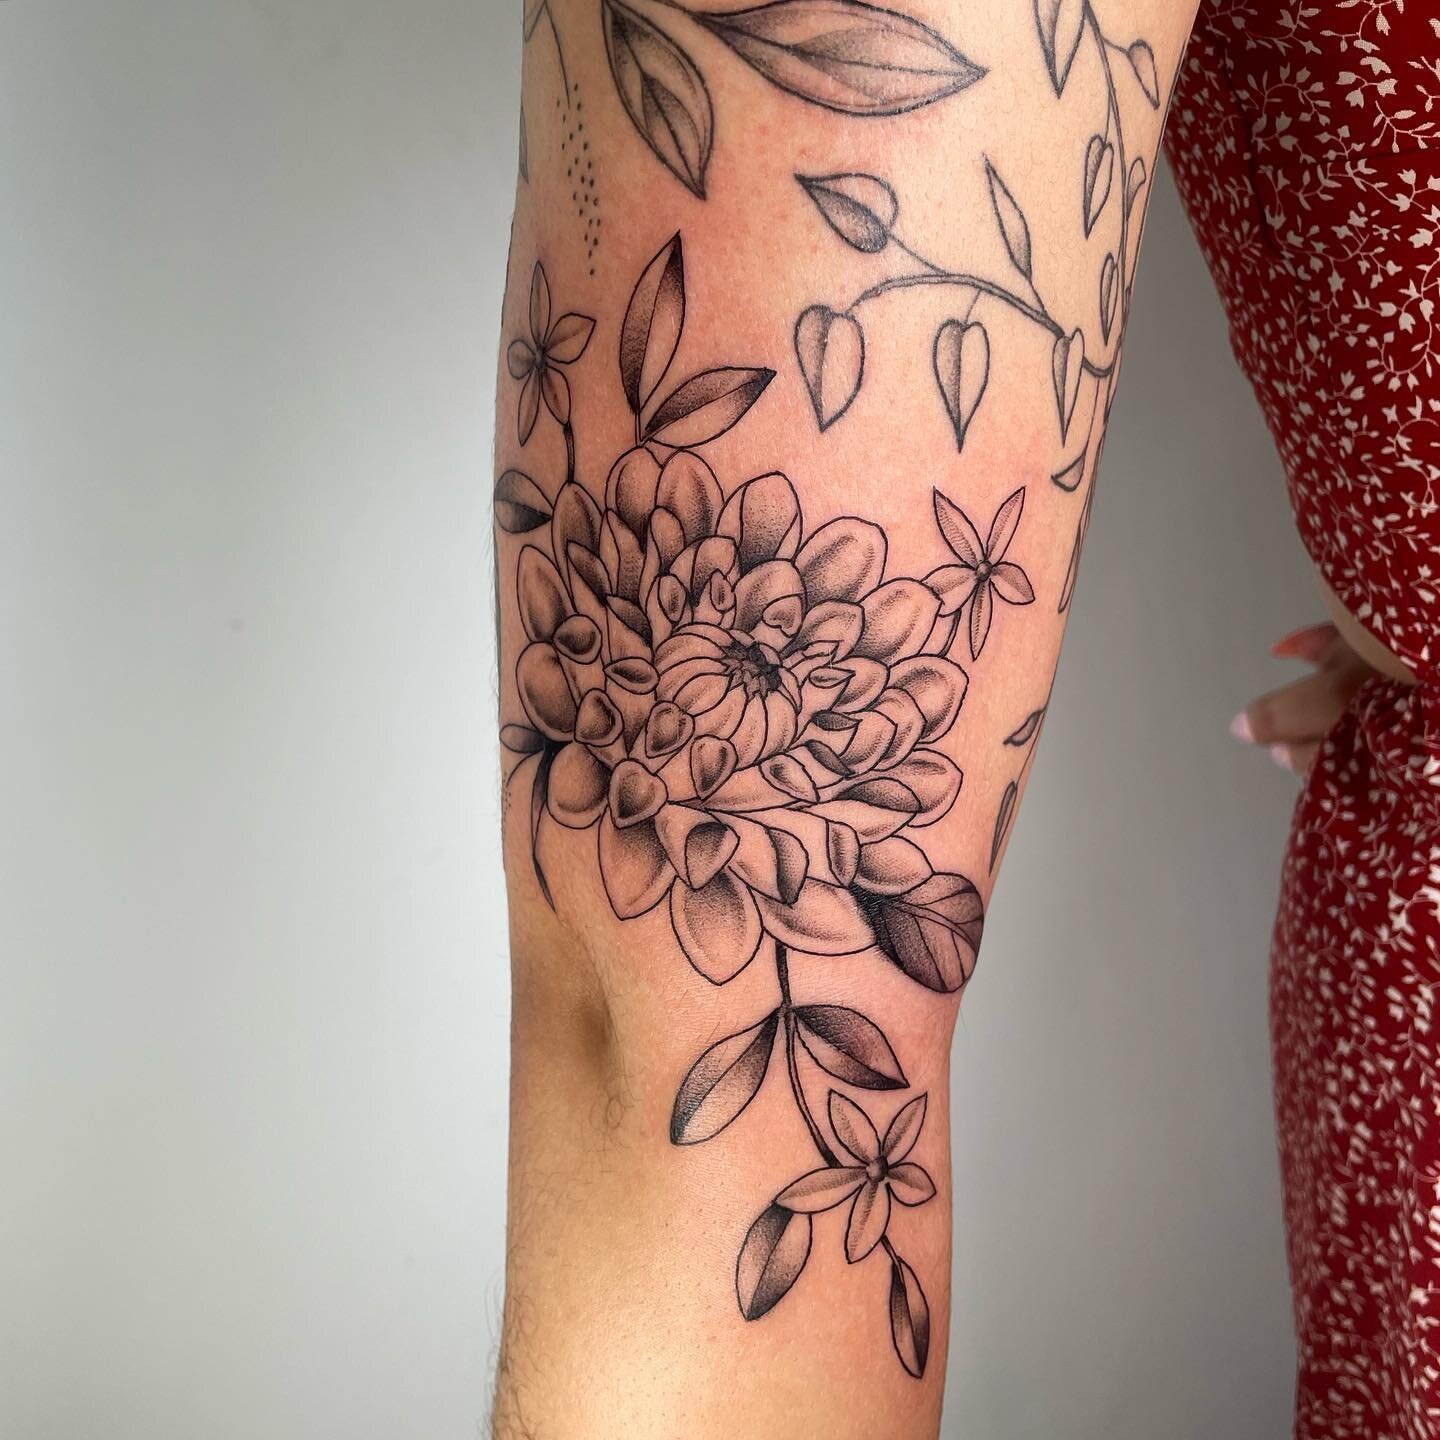 Dahlia and Jasmine to finish up Sarah&rsquo;s half sleeve. Everything else has been done in the last year and I love to see how it has so easily flowed together 🥲 thank you for your trust and enjoy your hot girl summer ☀️🔥
.
.
.
.
.
.
.
.
.
.
#euge